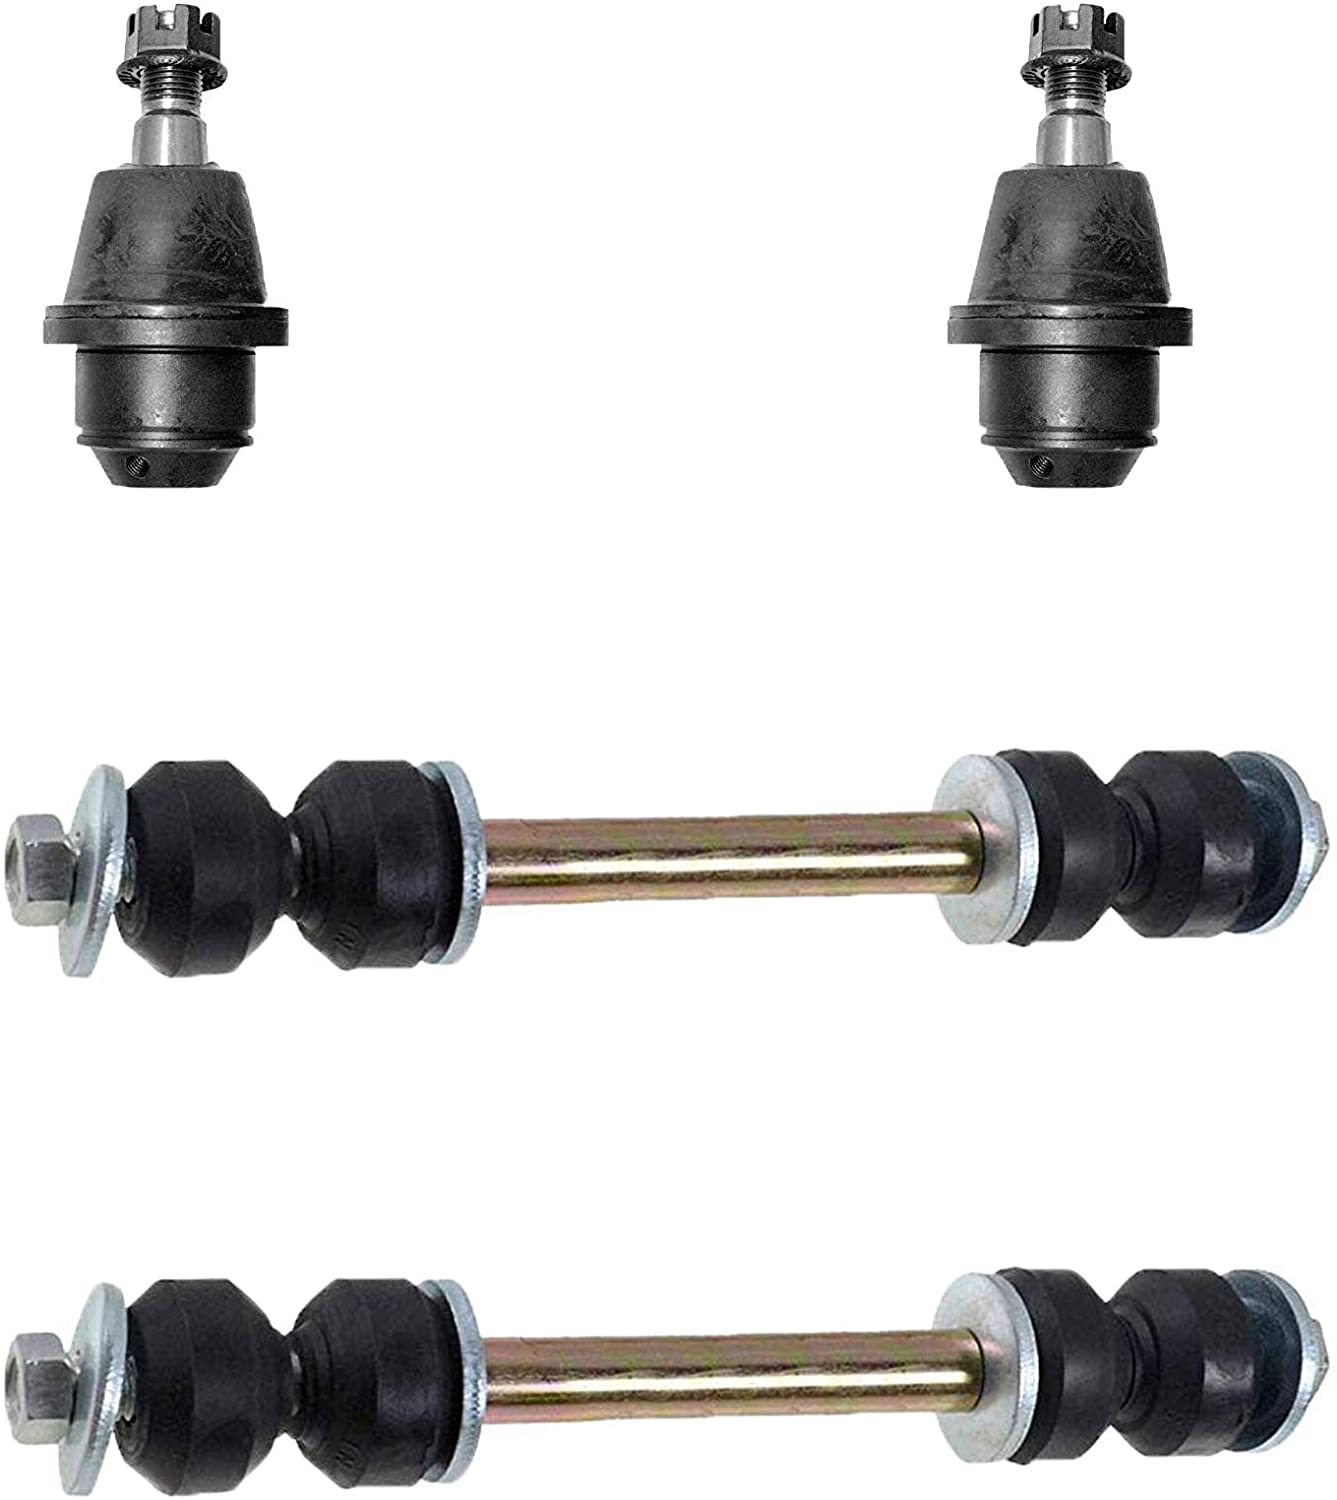 Detroit Axle - 4pc Front Lower Ball Joints, Sway Bar End Links for Cadillac Chevy GMC Models - See Fitment